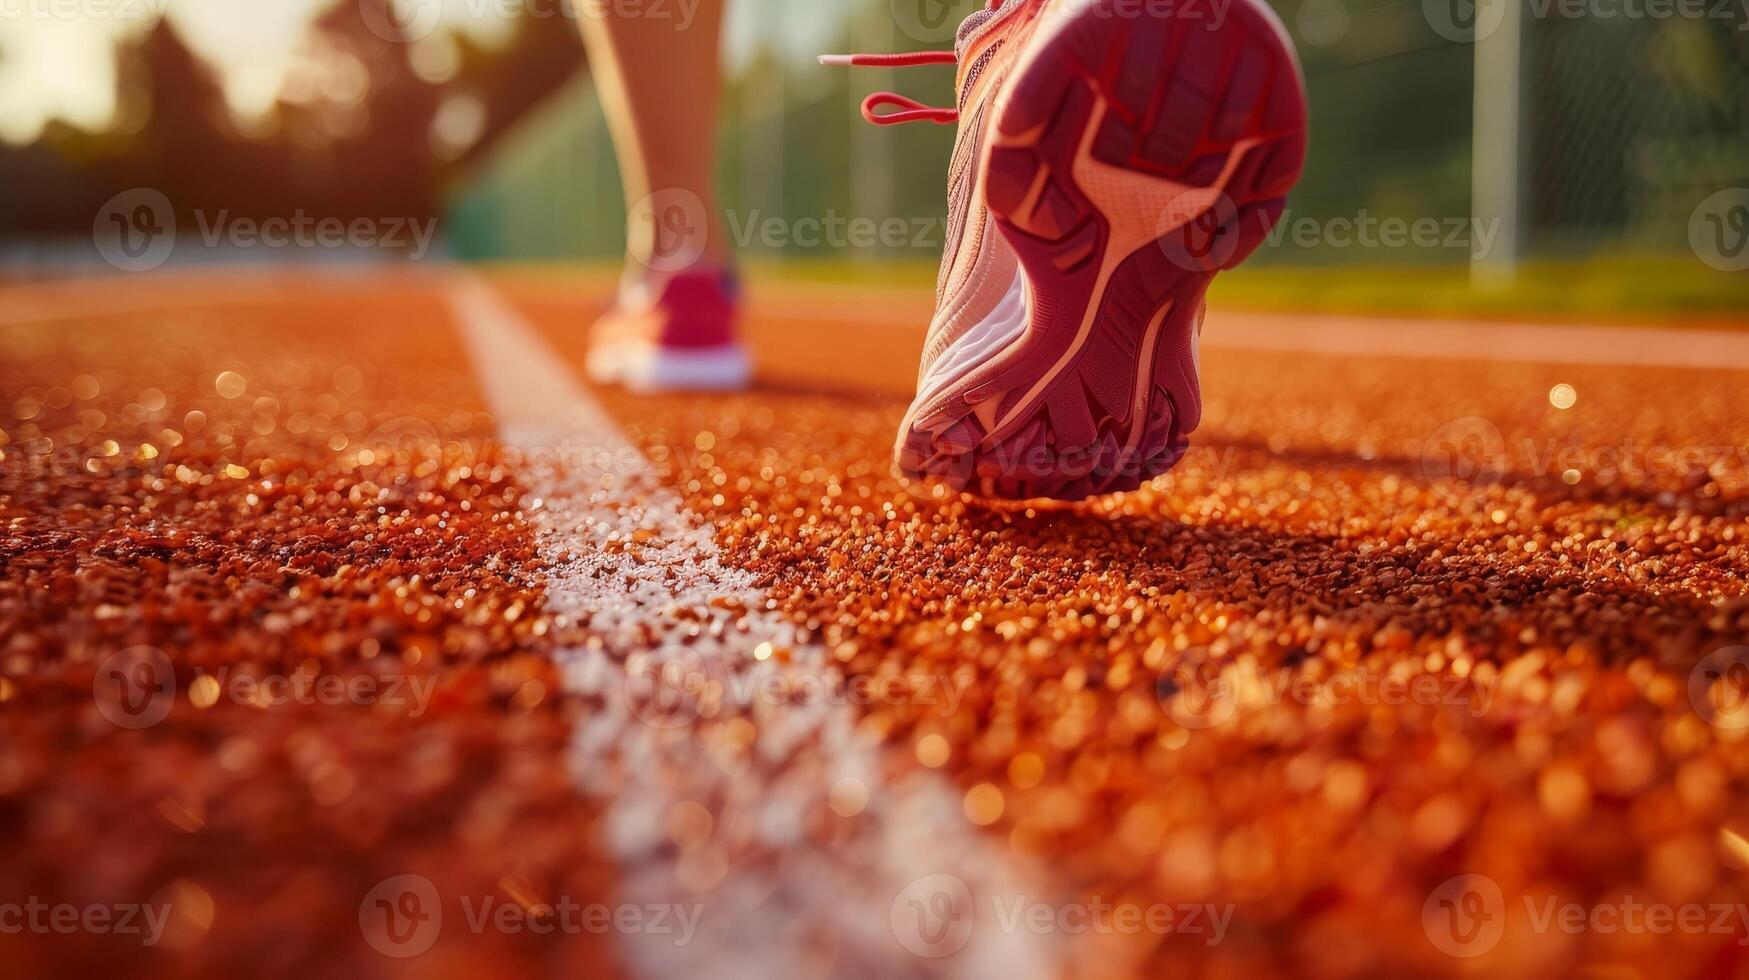 Fitness, sports, training, people and lifestyle concepts. Close-up of woman's feet running on a track from behind. photo